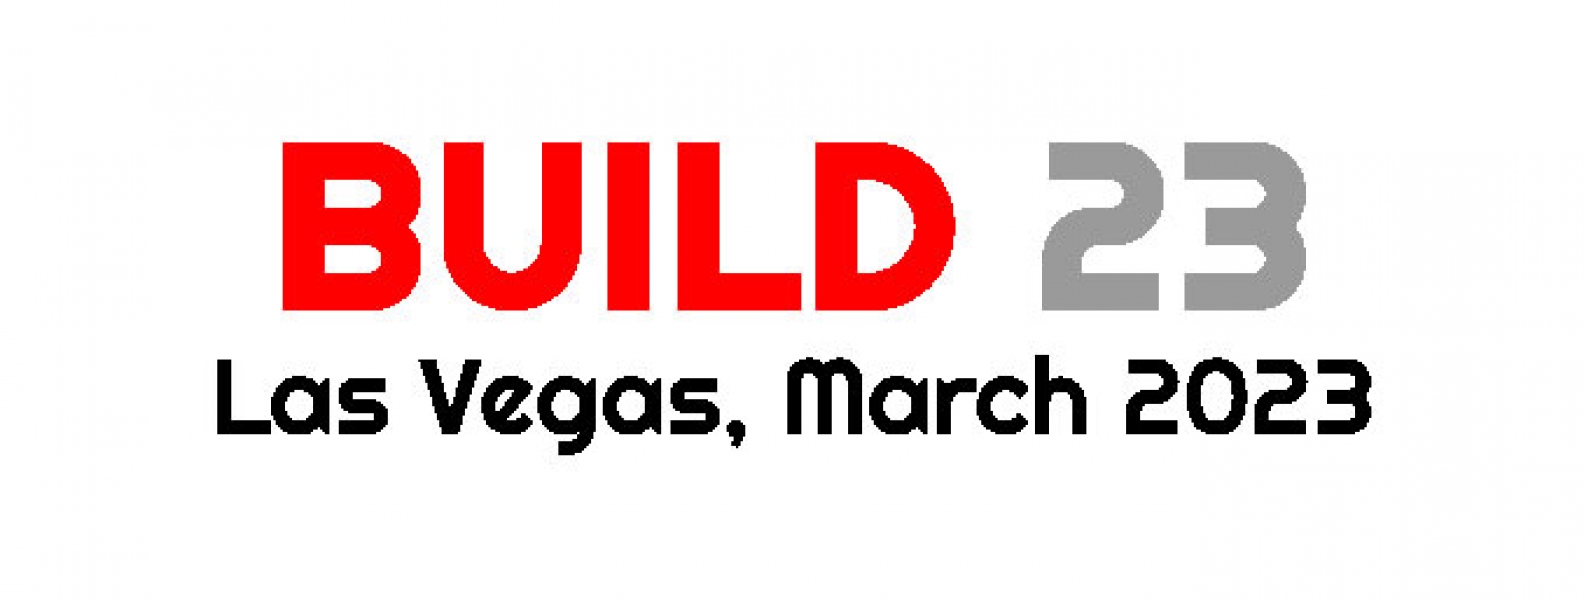 BUILD 23 AWCI'S Convention + Expo Custom Trade Show Booth